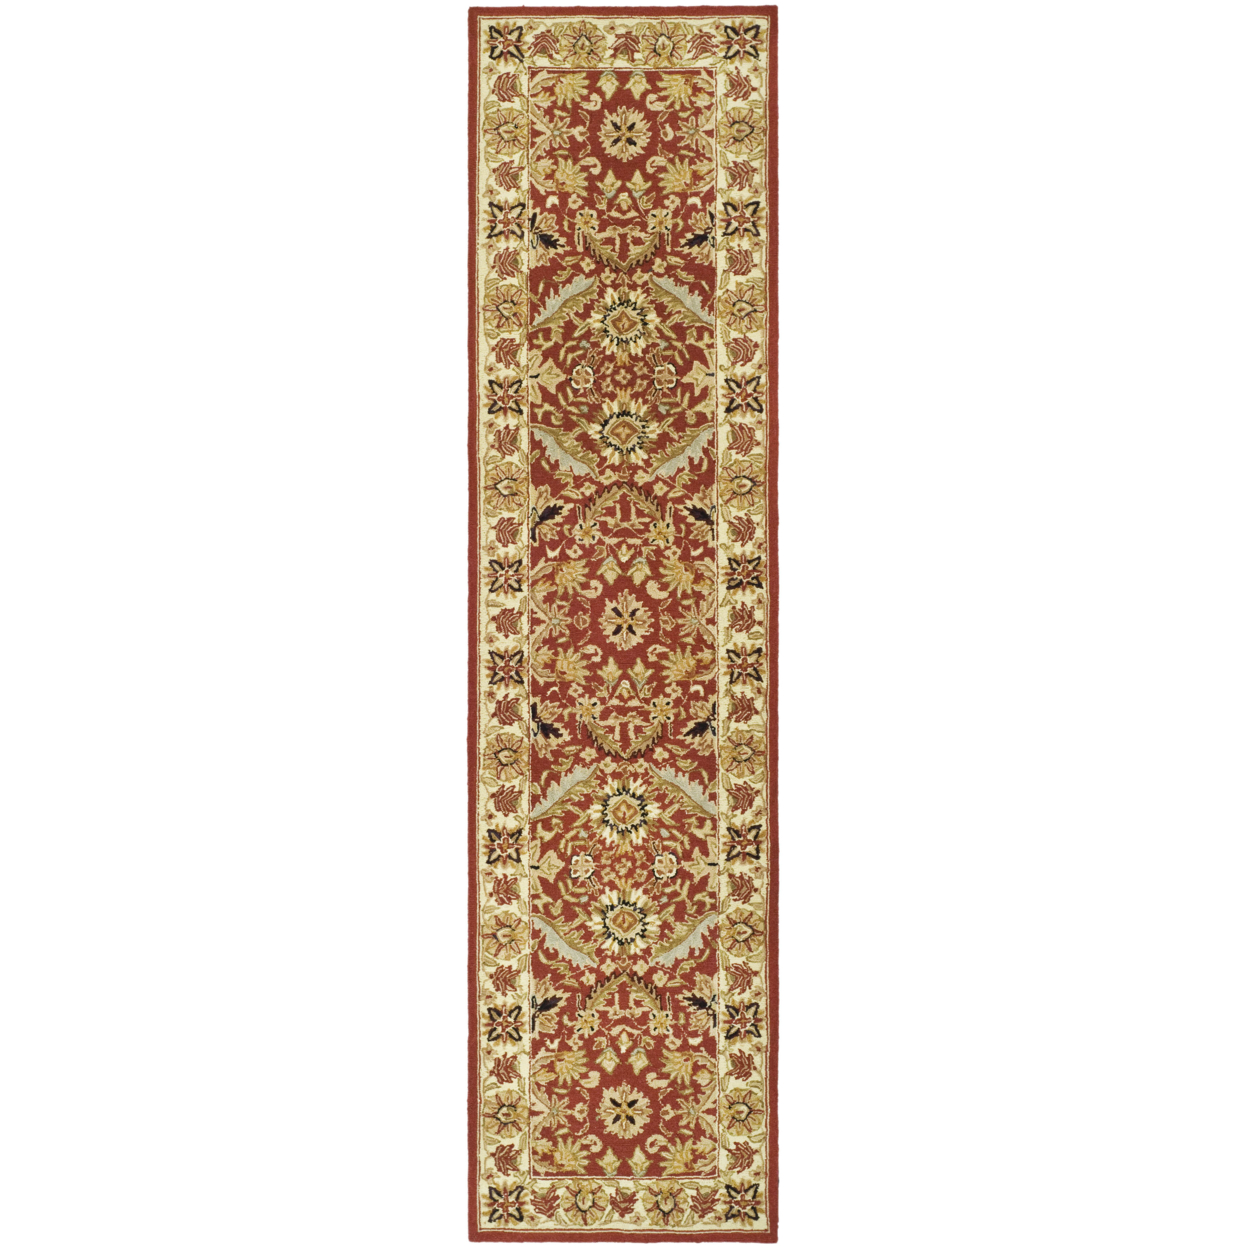 SAFAVIEH Chelsea HK157A Hand-hooked Red / Ivory Rug - 2' 6 X 6'